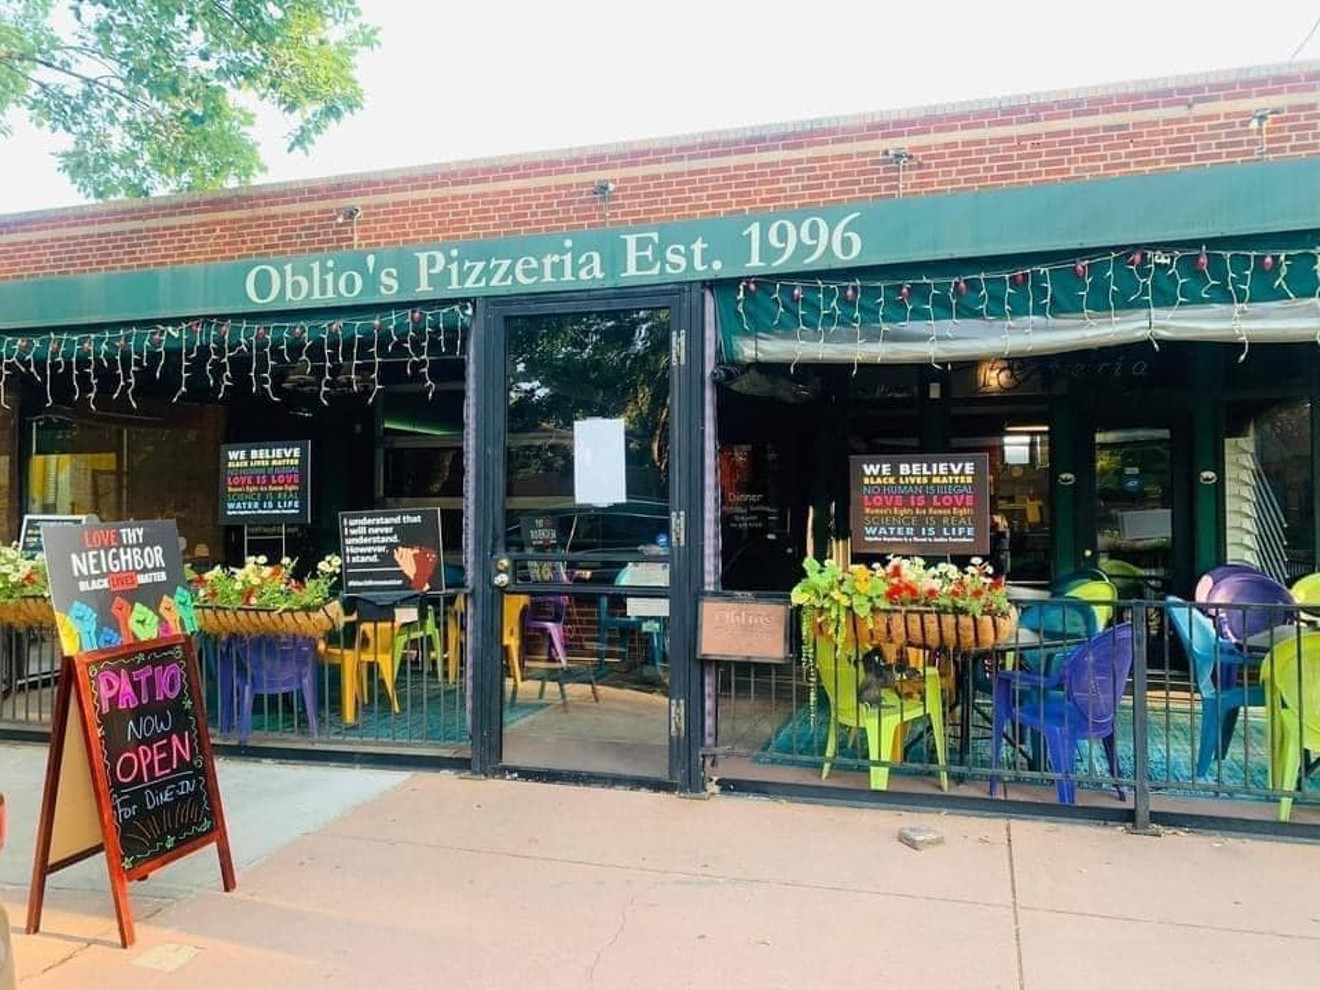 Oblio's Pizzeria in Park Hill as it looks now